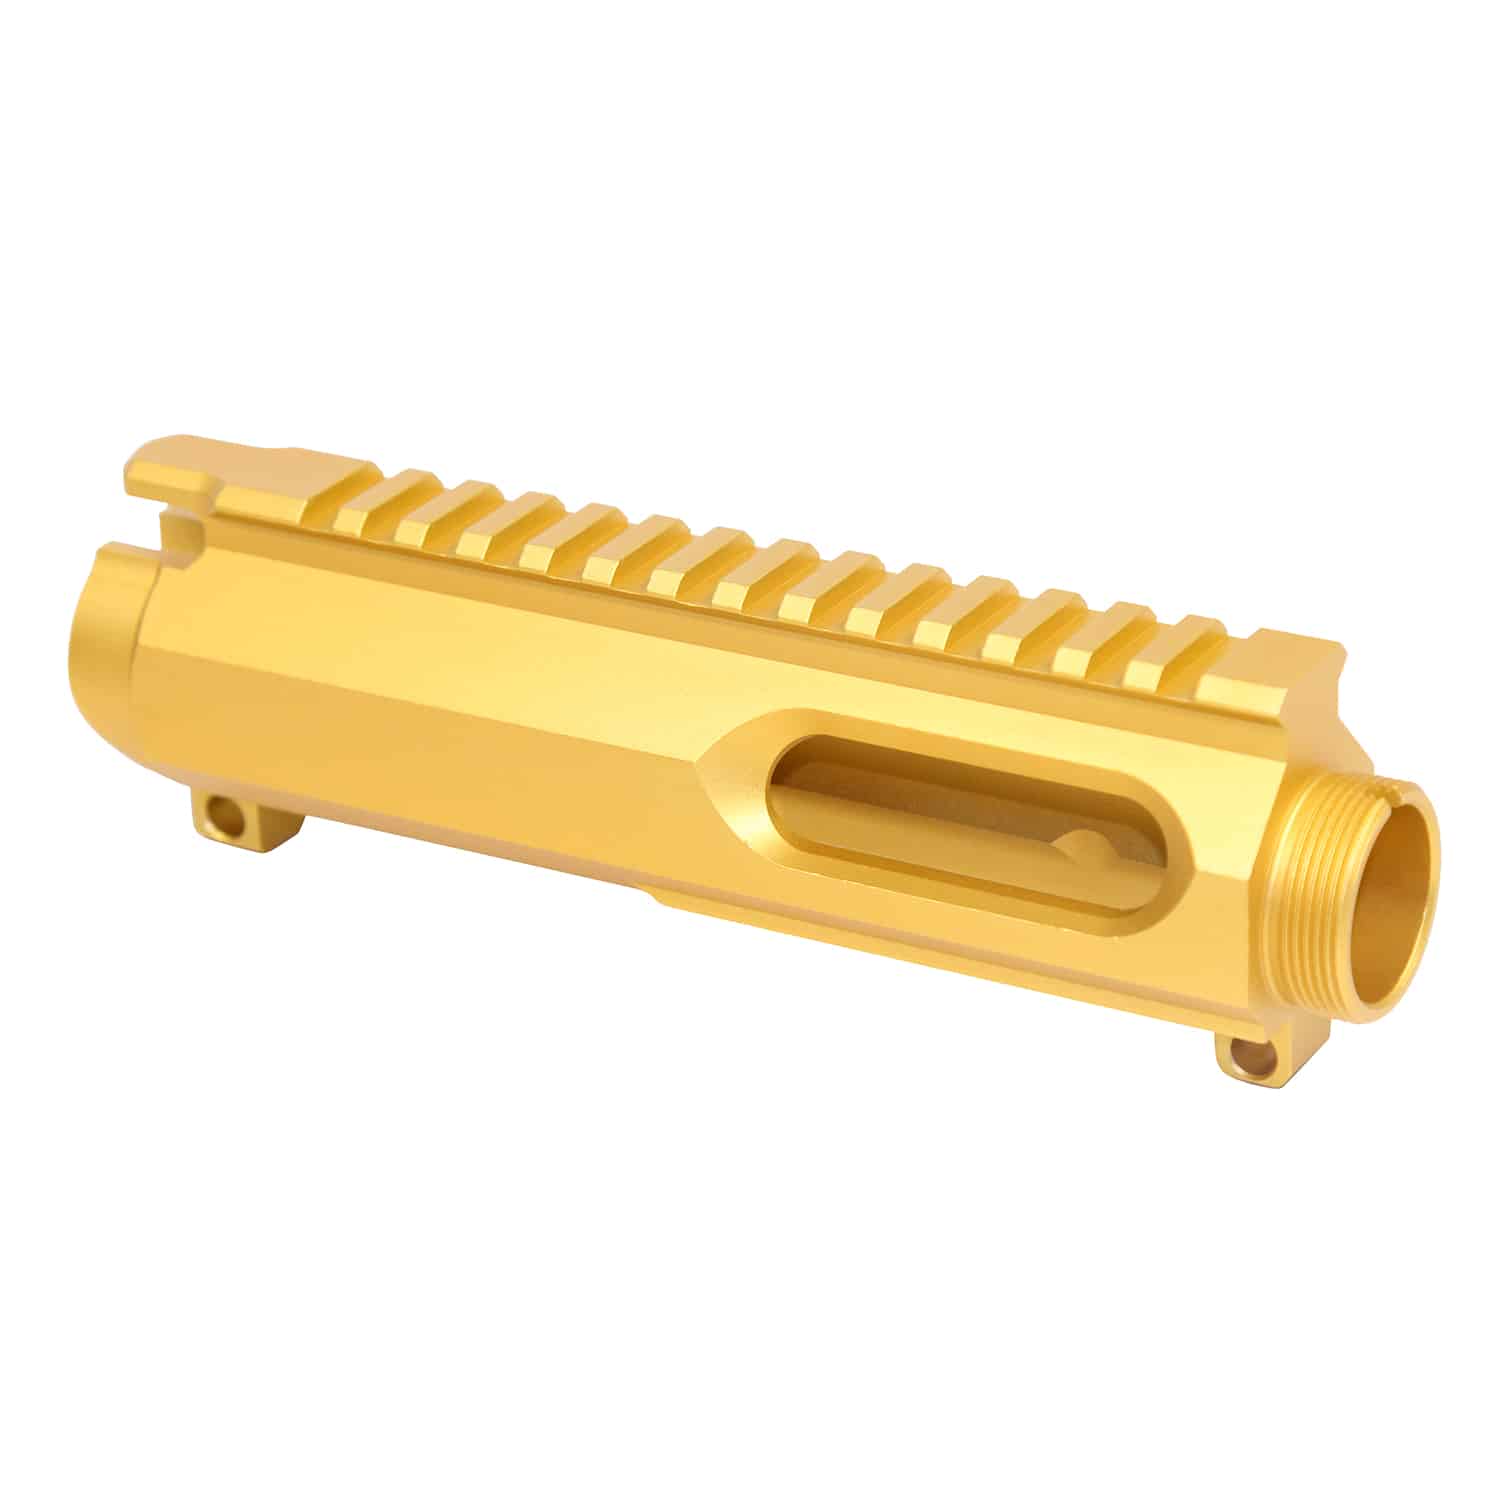 AR-15 9mm Dedicated Stripped Billet Upper Receiver in Anodized Gold.